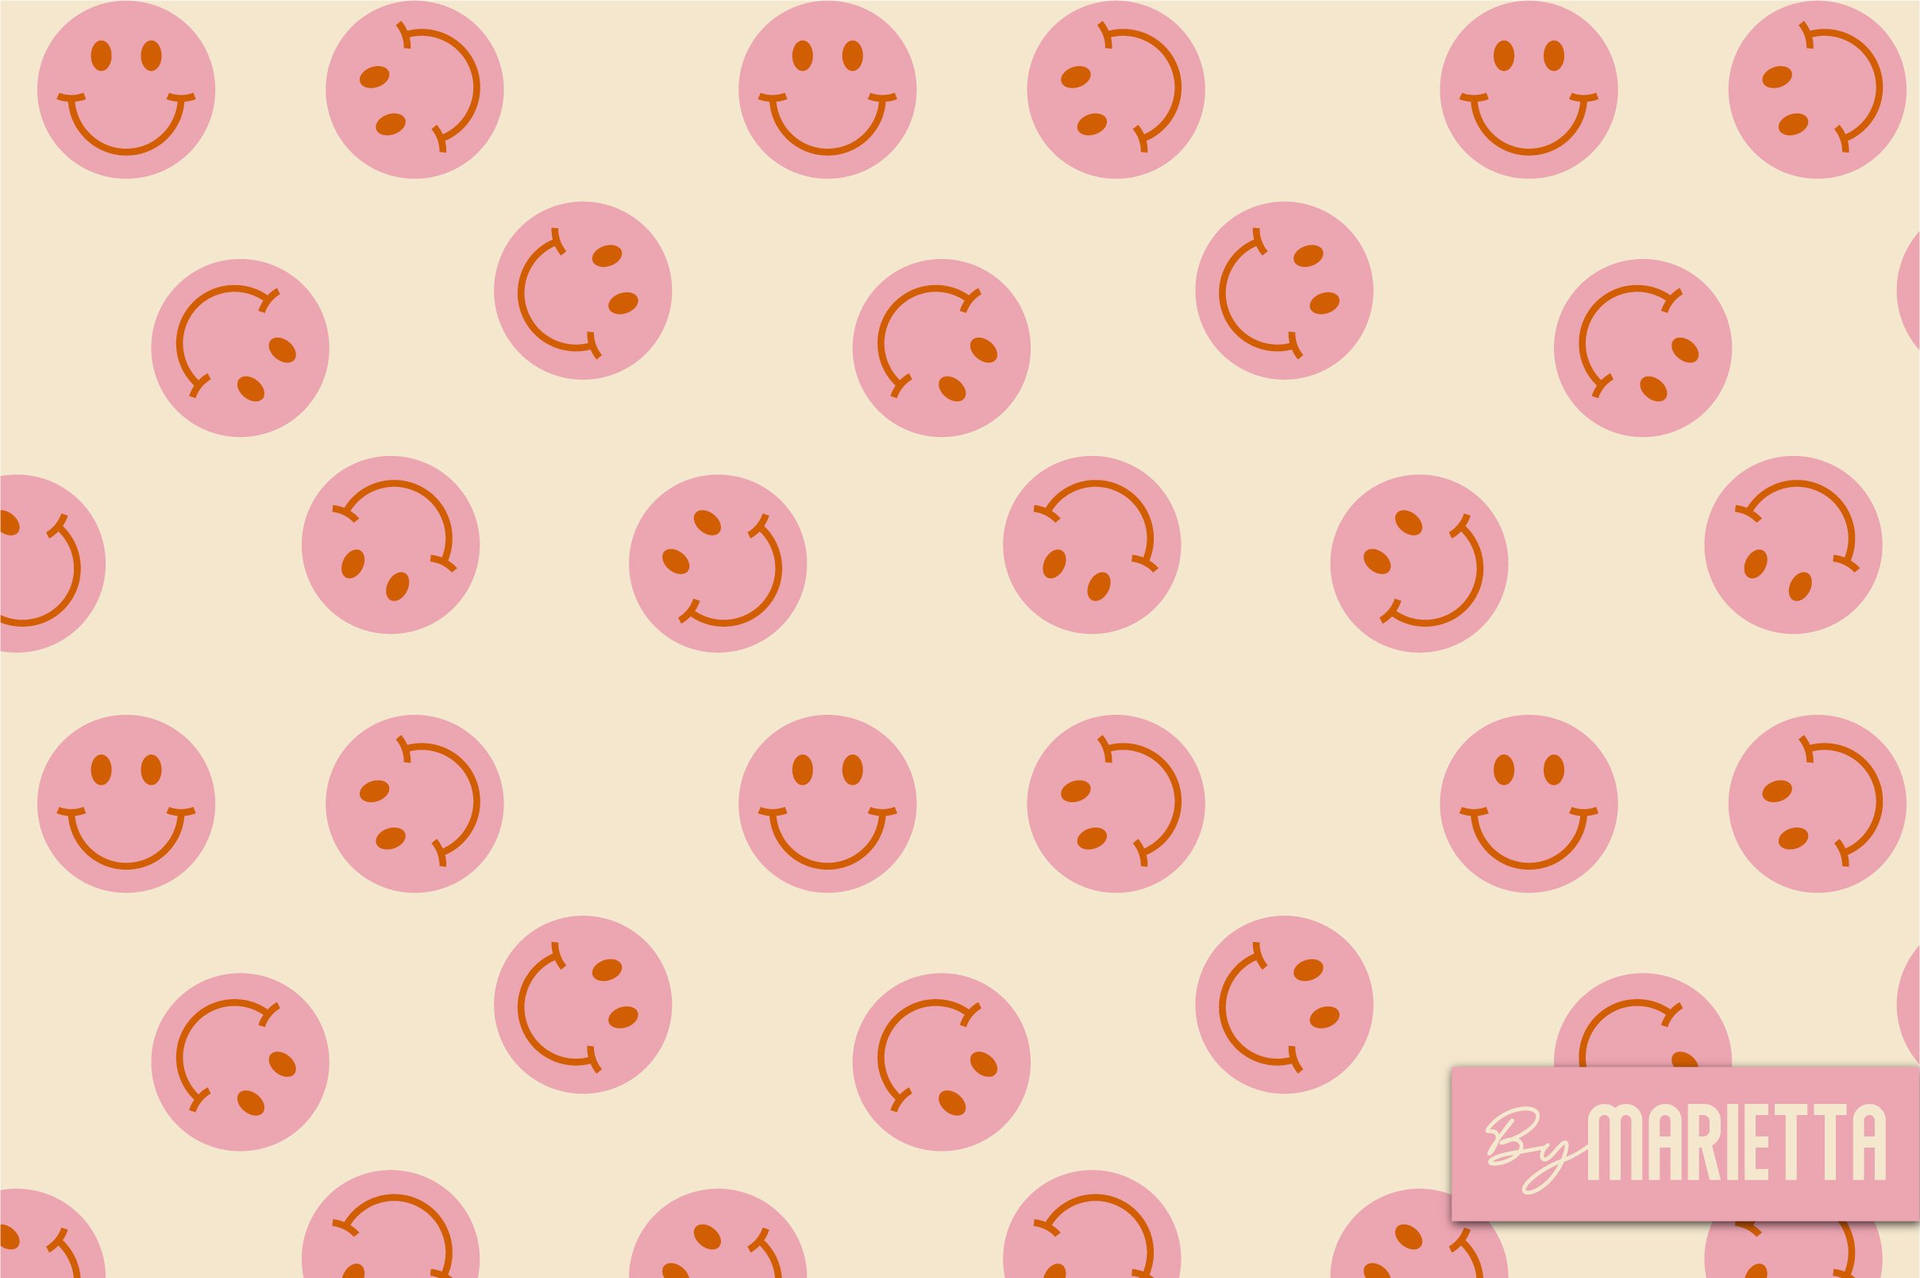 Retro Smiley Face Vector Art Icons and Graphics for Free Download